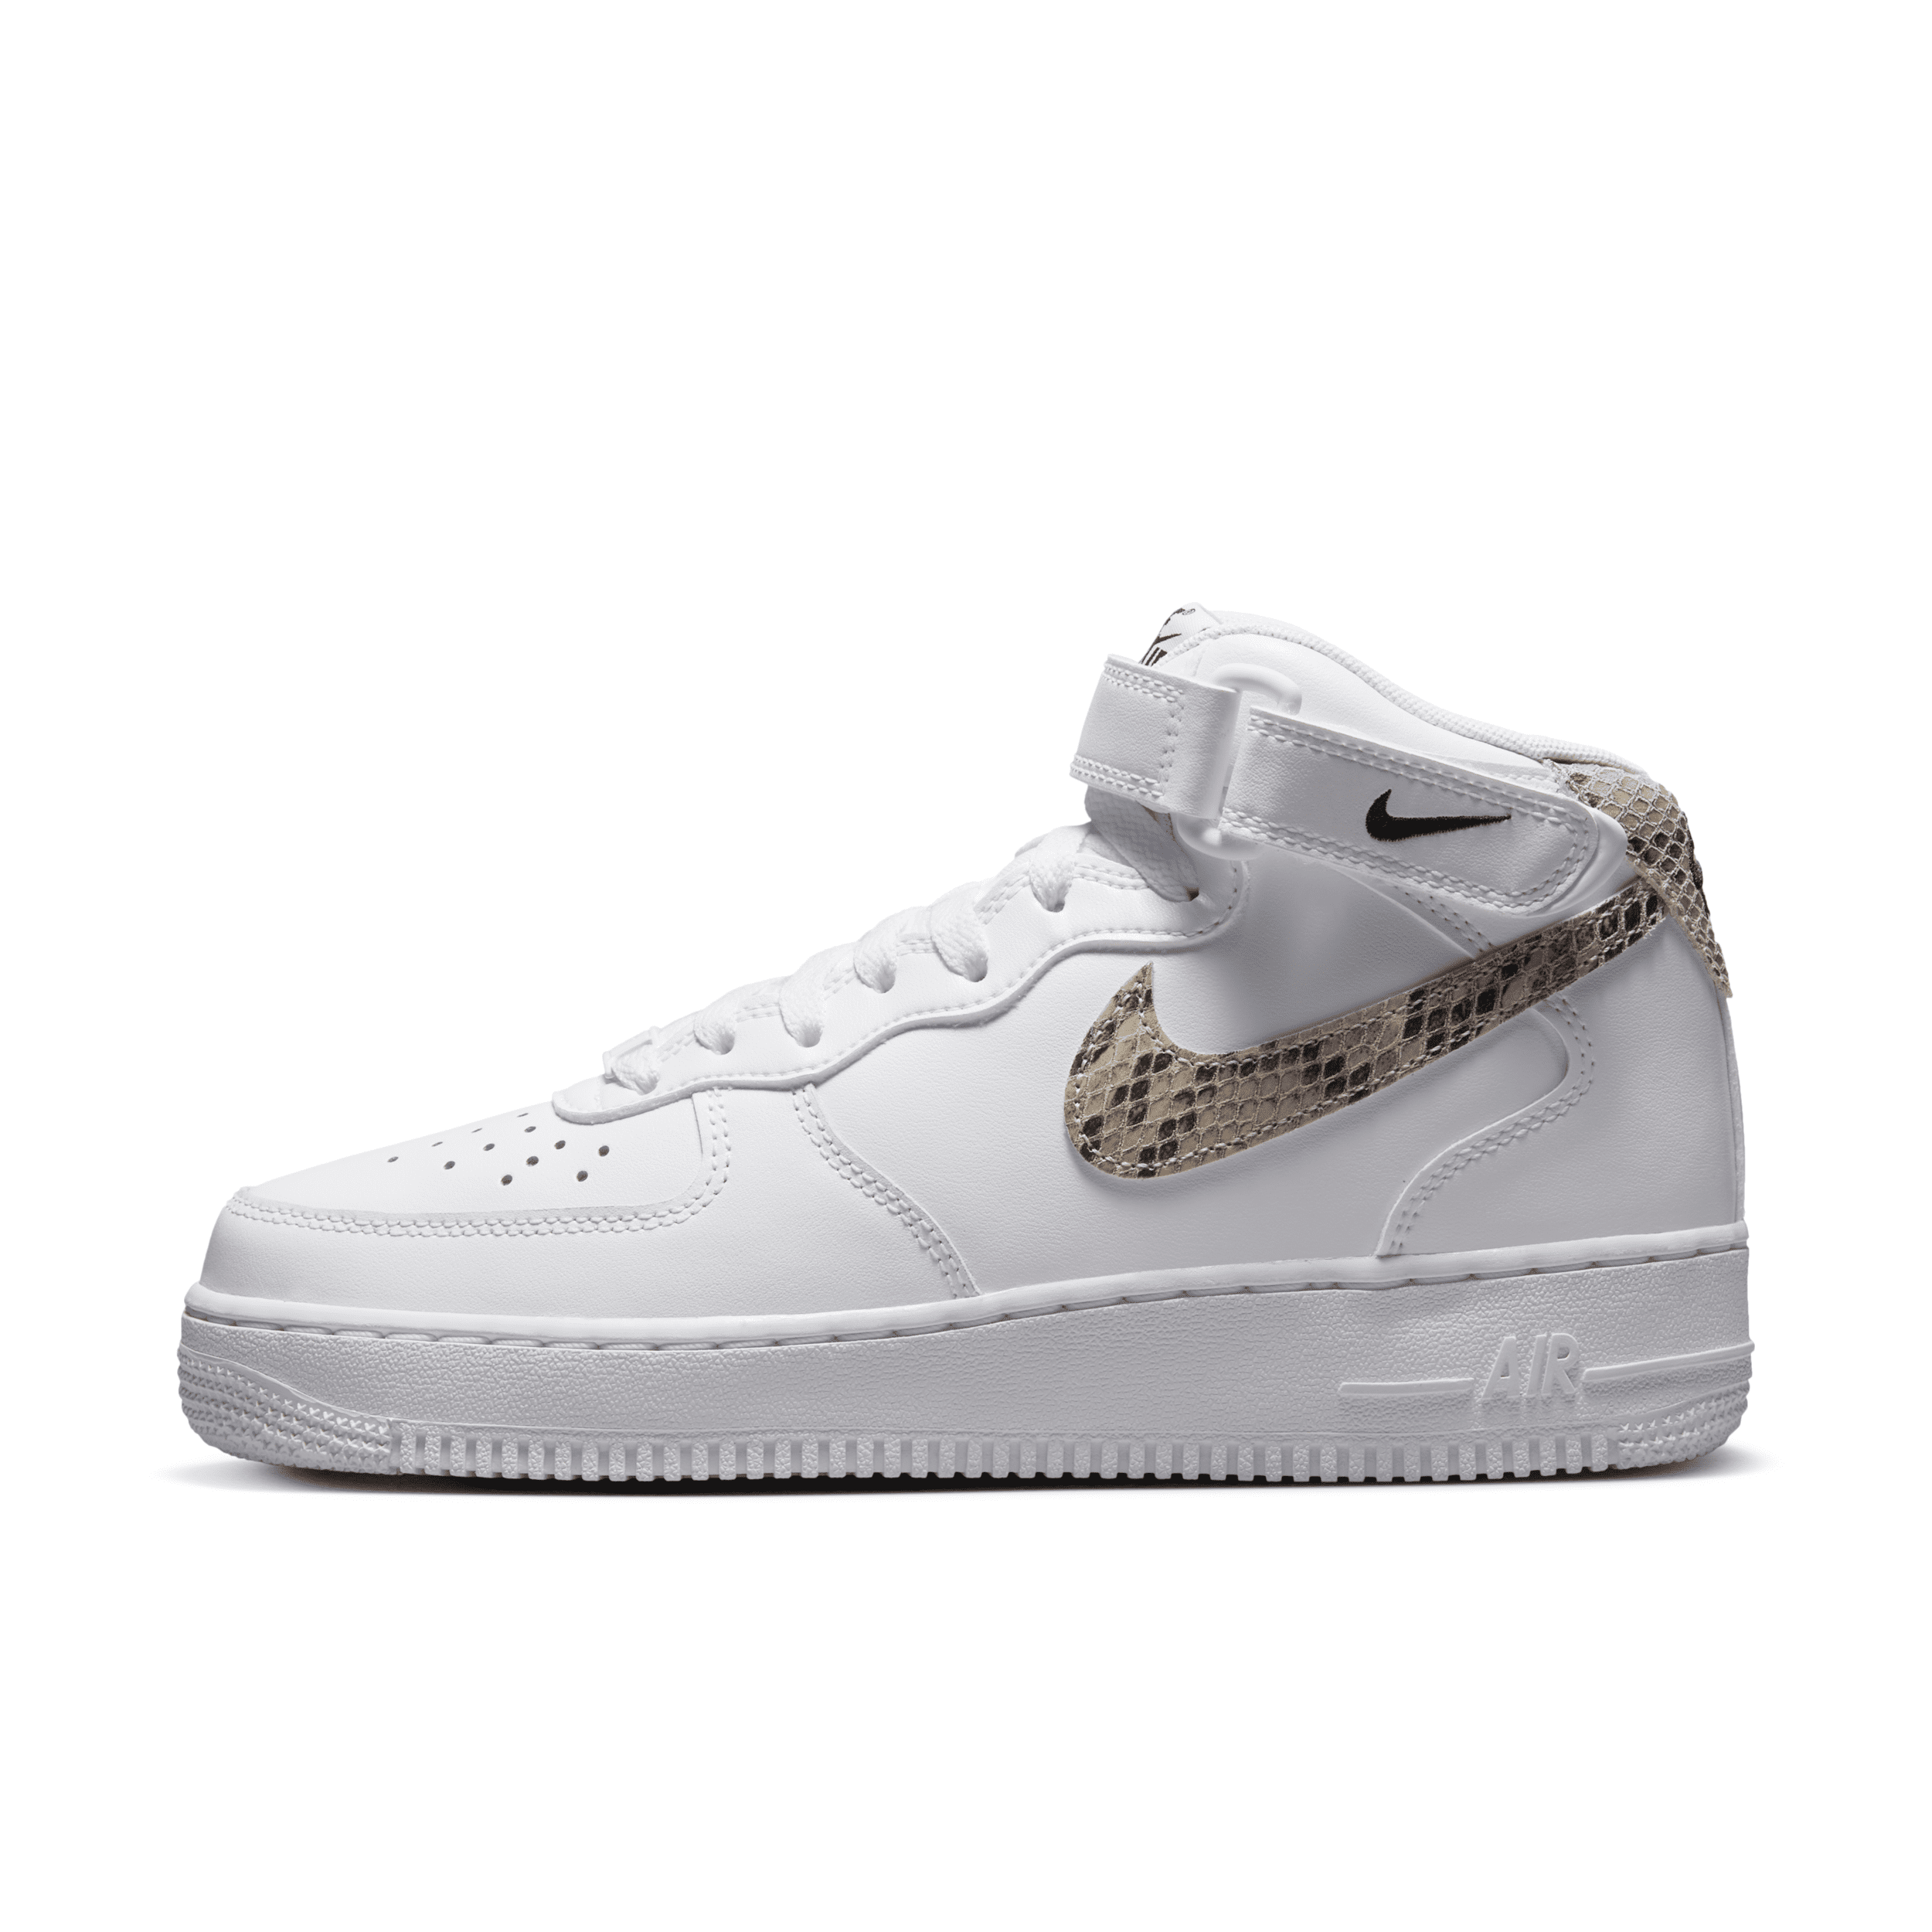 NIKE WOMEN'S AIR FORCE 1 '07 MID SHOES,1003839014